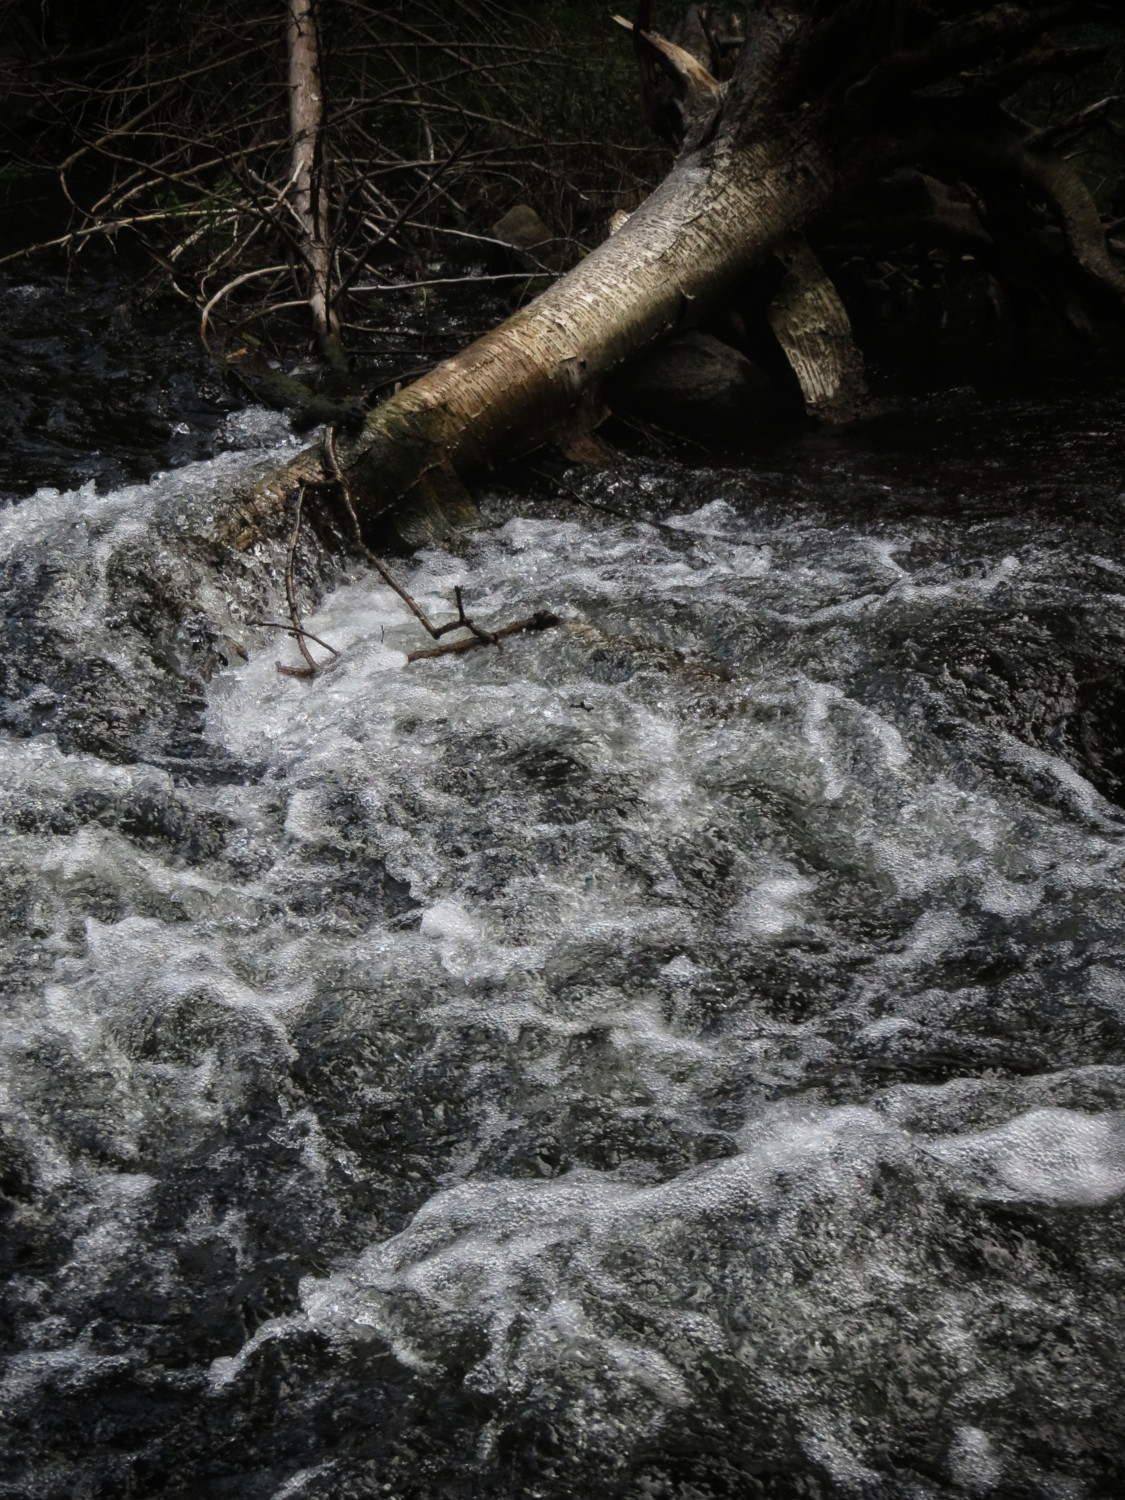 Photograph of a dark, surreal, raging river. Fallen tree in turbulent stream. Naturalistic and pagan inspired.